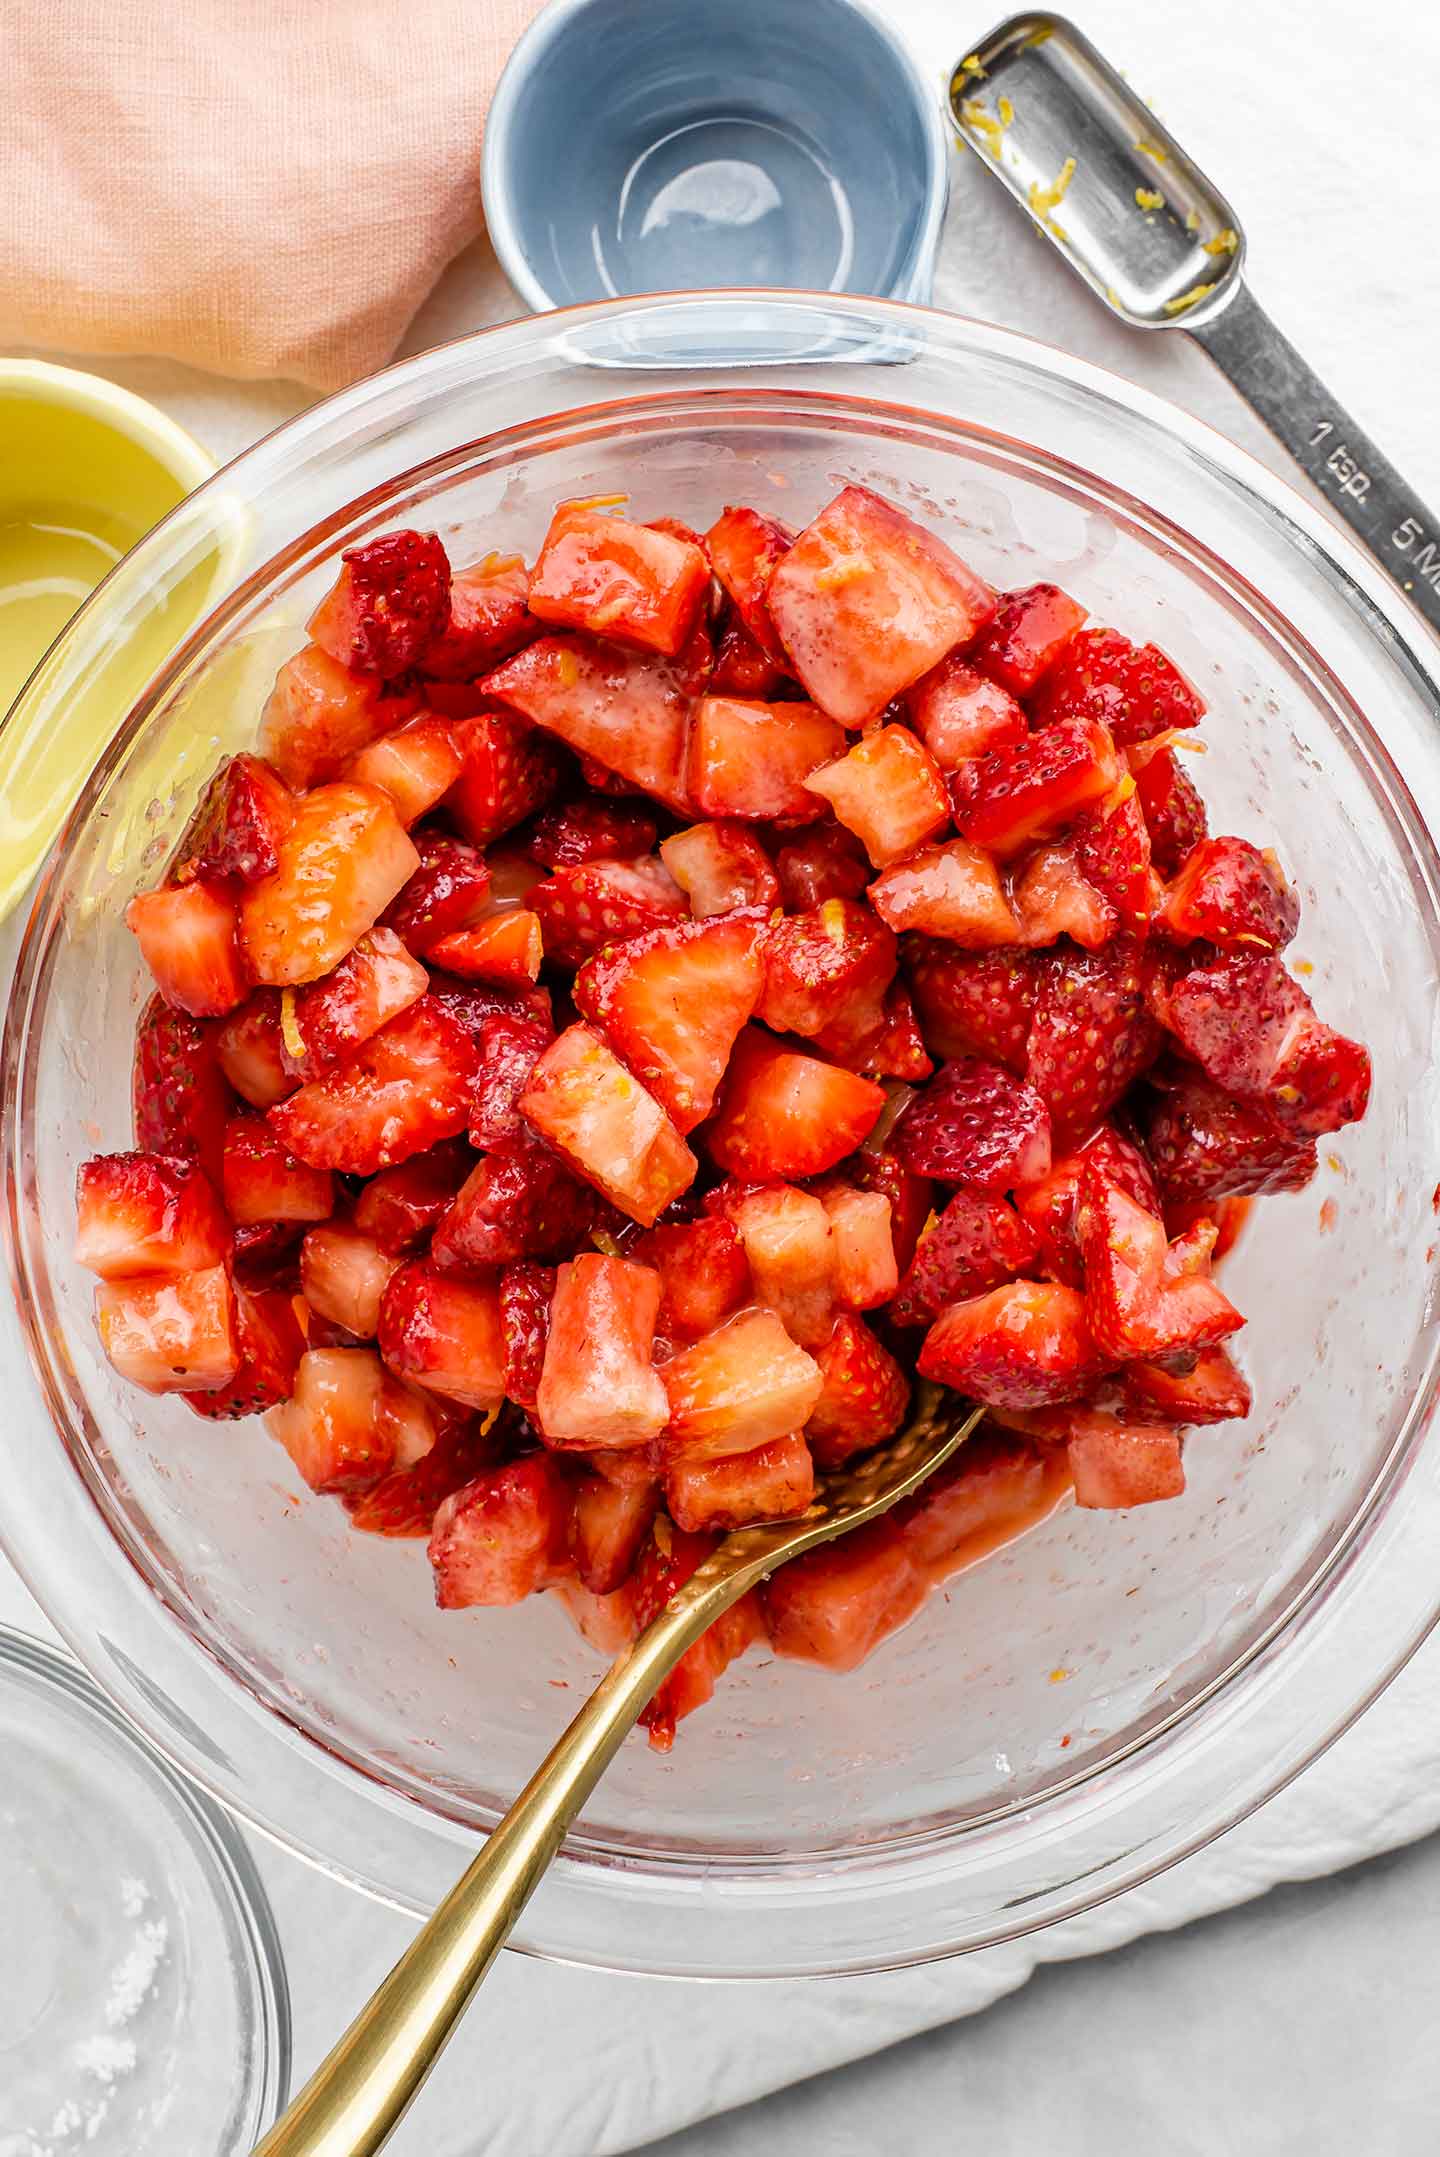 Top down view of diced strawberries with a thicker sauce on them. Pieces of lemon zest are visible on the berries and they have been coated in sugar and starch.